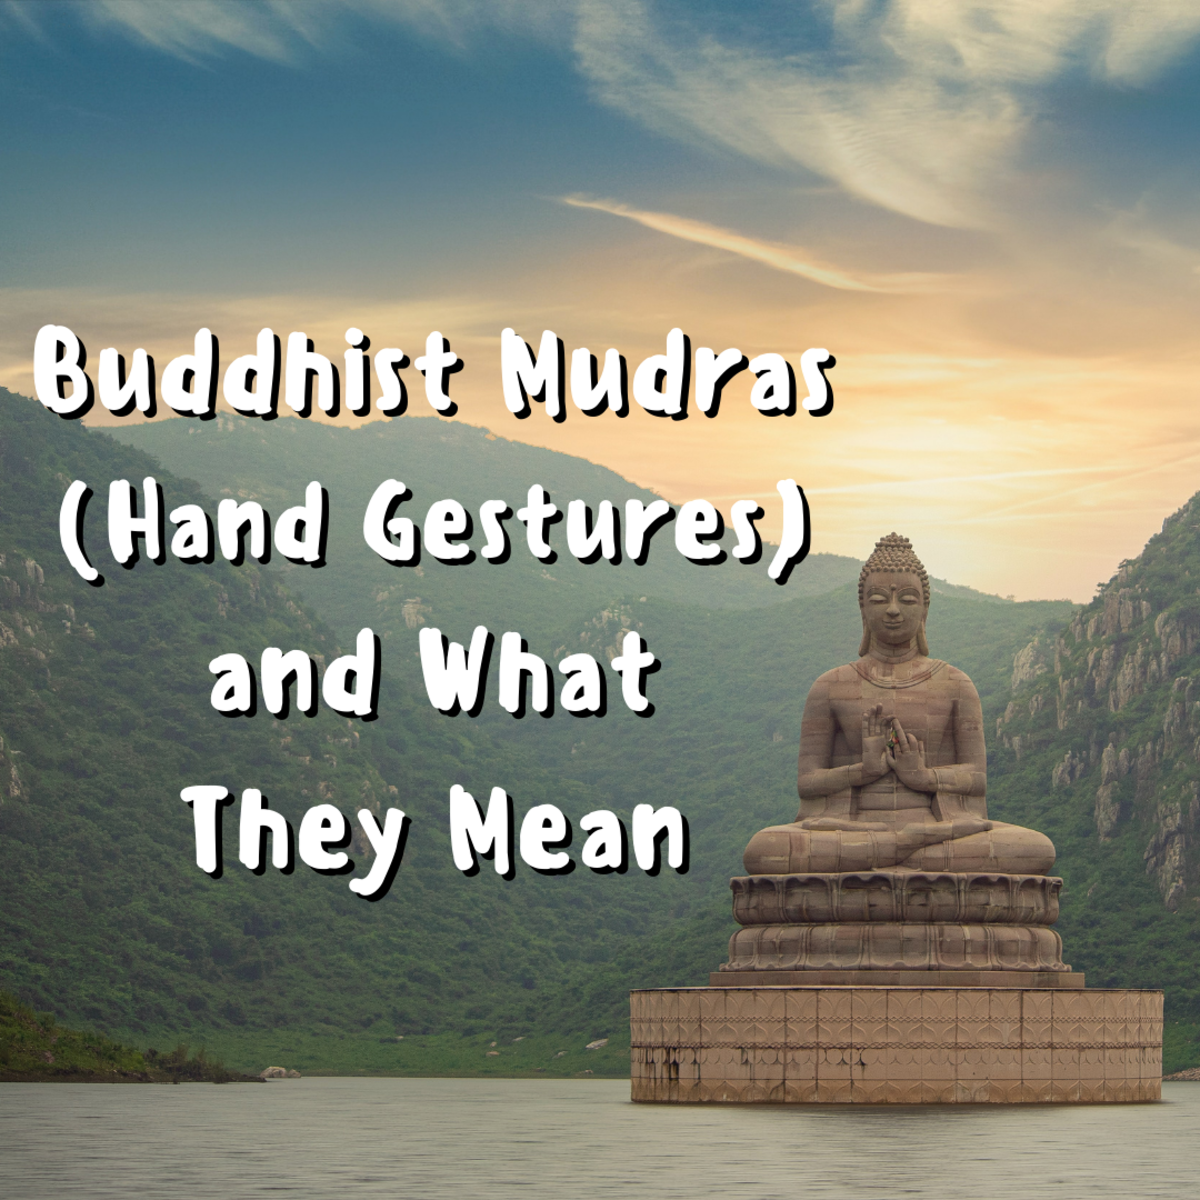 This article teaches 8 of the Buddhist mudras (hand gestures) and explains what they mean. It also provides info on where best to place various buddhas in your home. Finally, you'll find a relaxing video to teach you yoga for your hands!